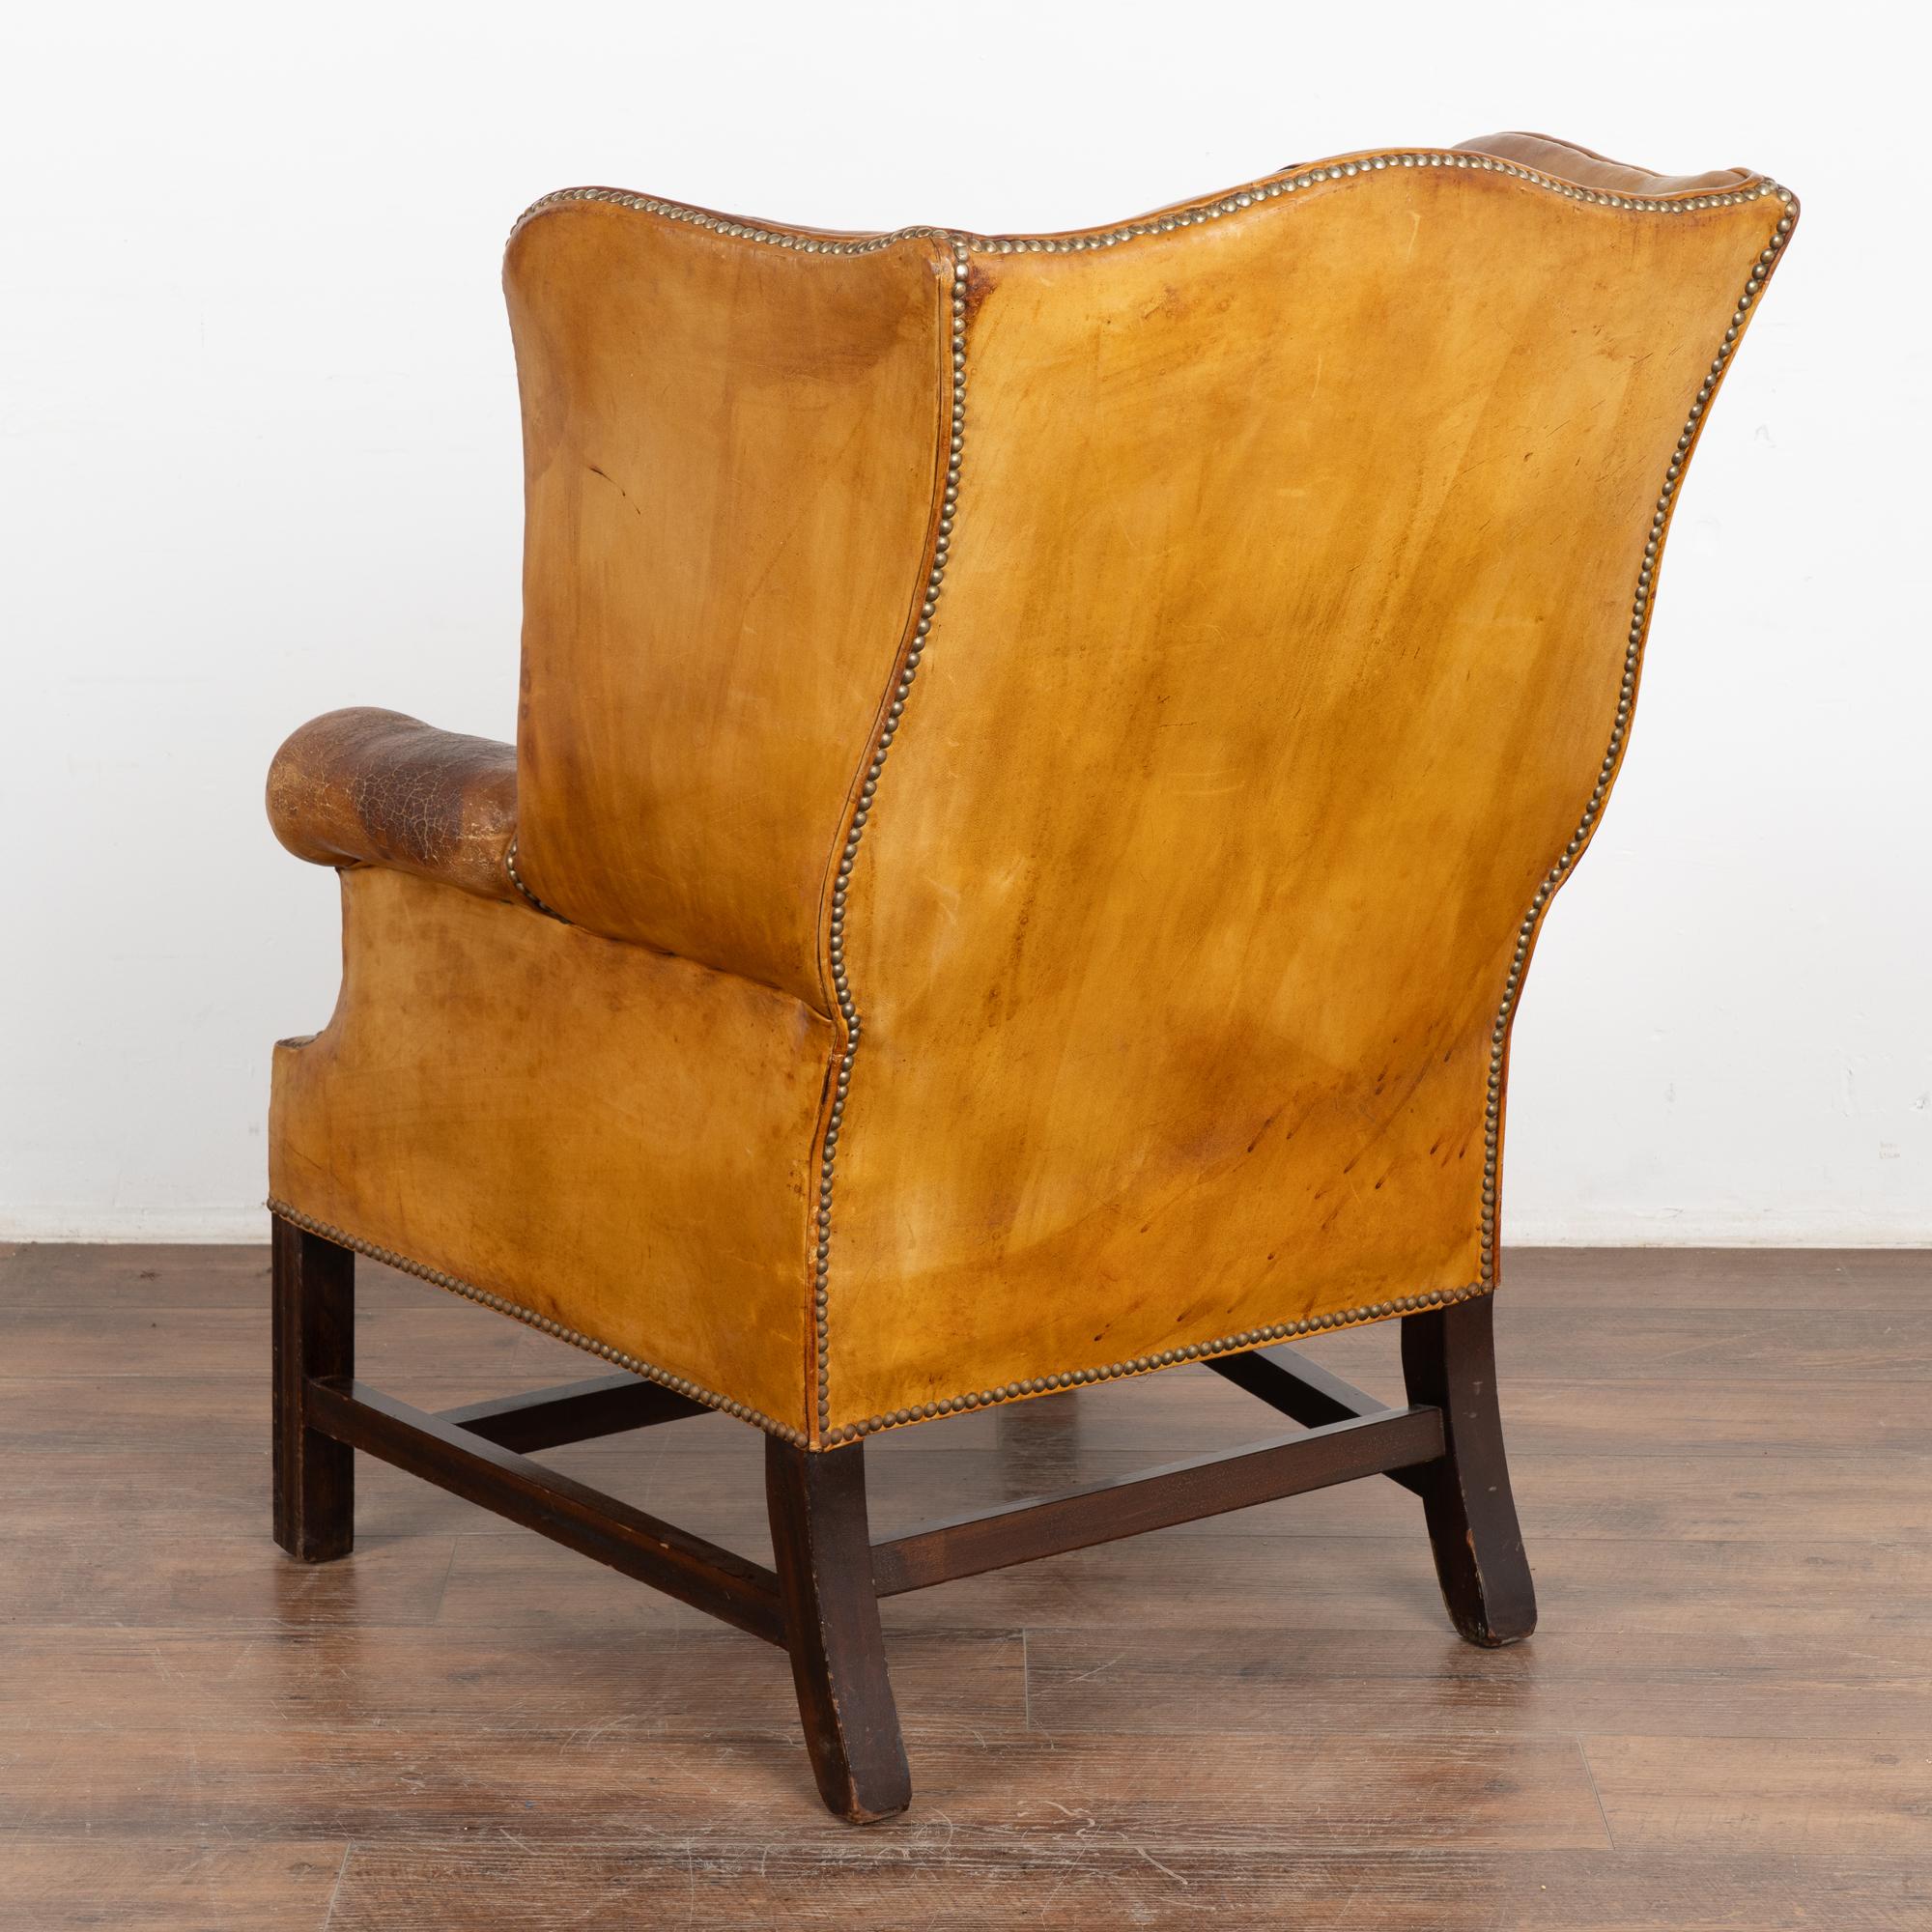 Vintage Brown Leather Wingback Chesterfield Arm Chair, England circa 1940 For Sale 6